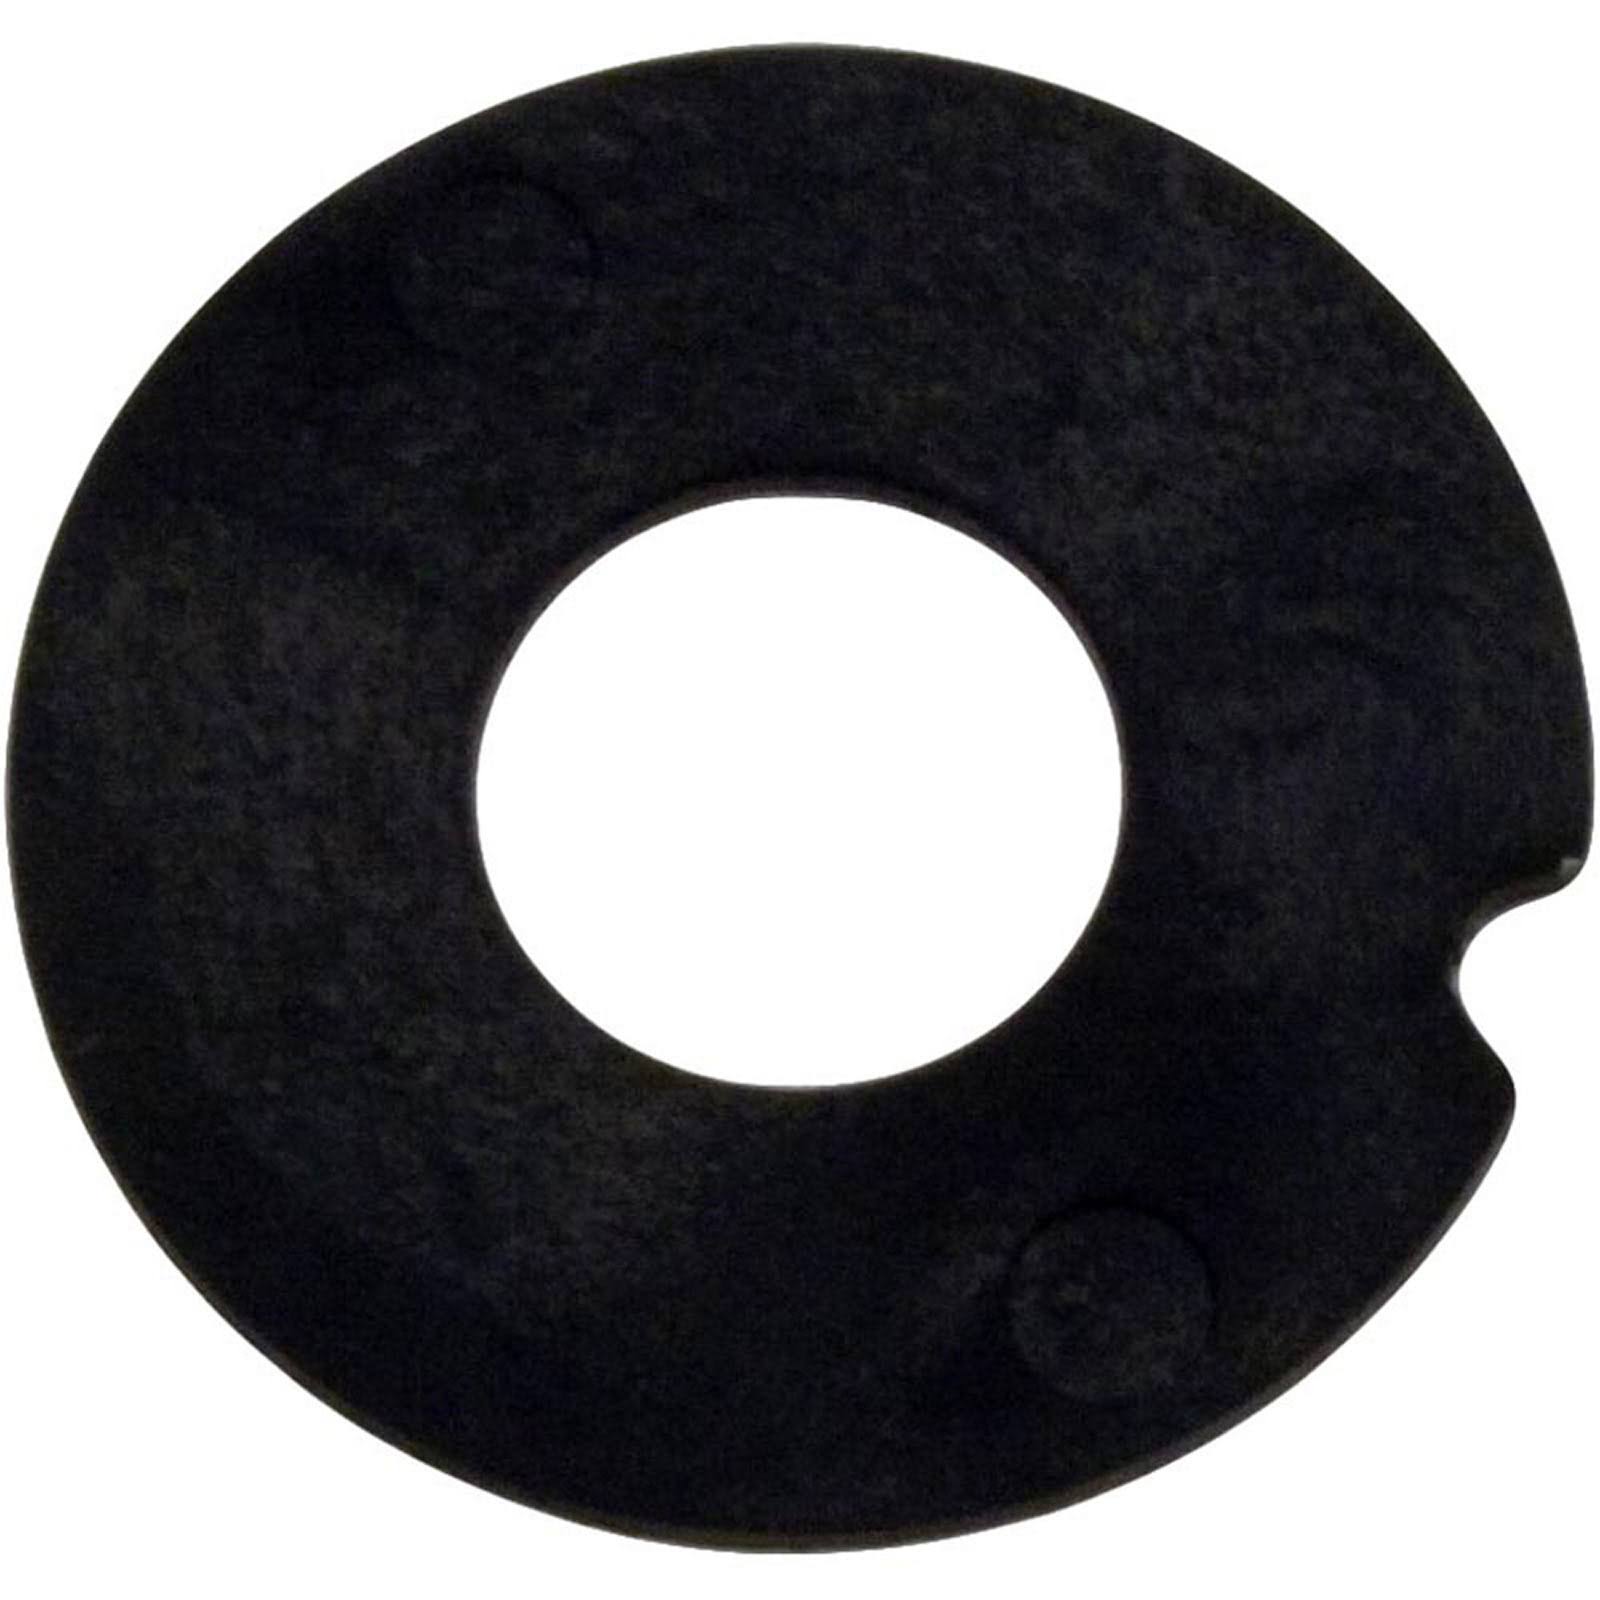 Pentair 272505 Plastic Washer for Six-way 1.5" Multiport Valve